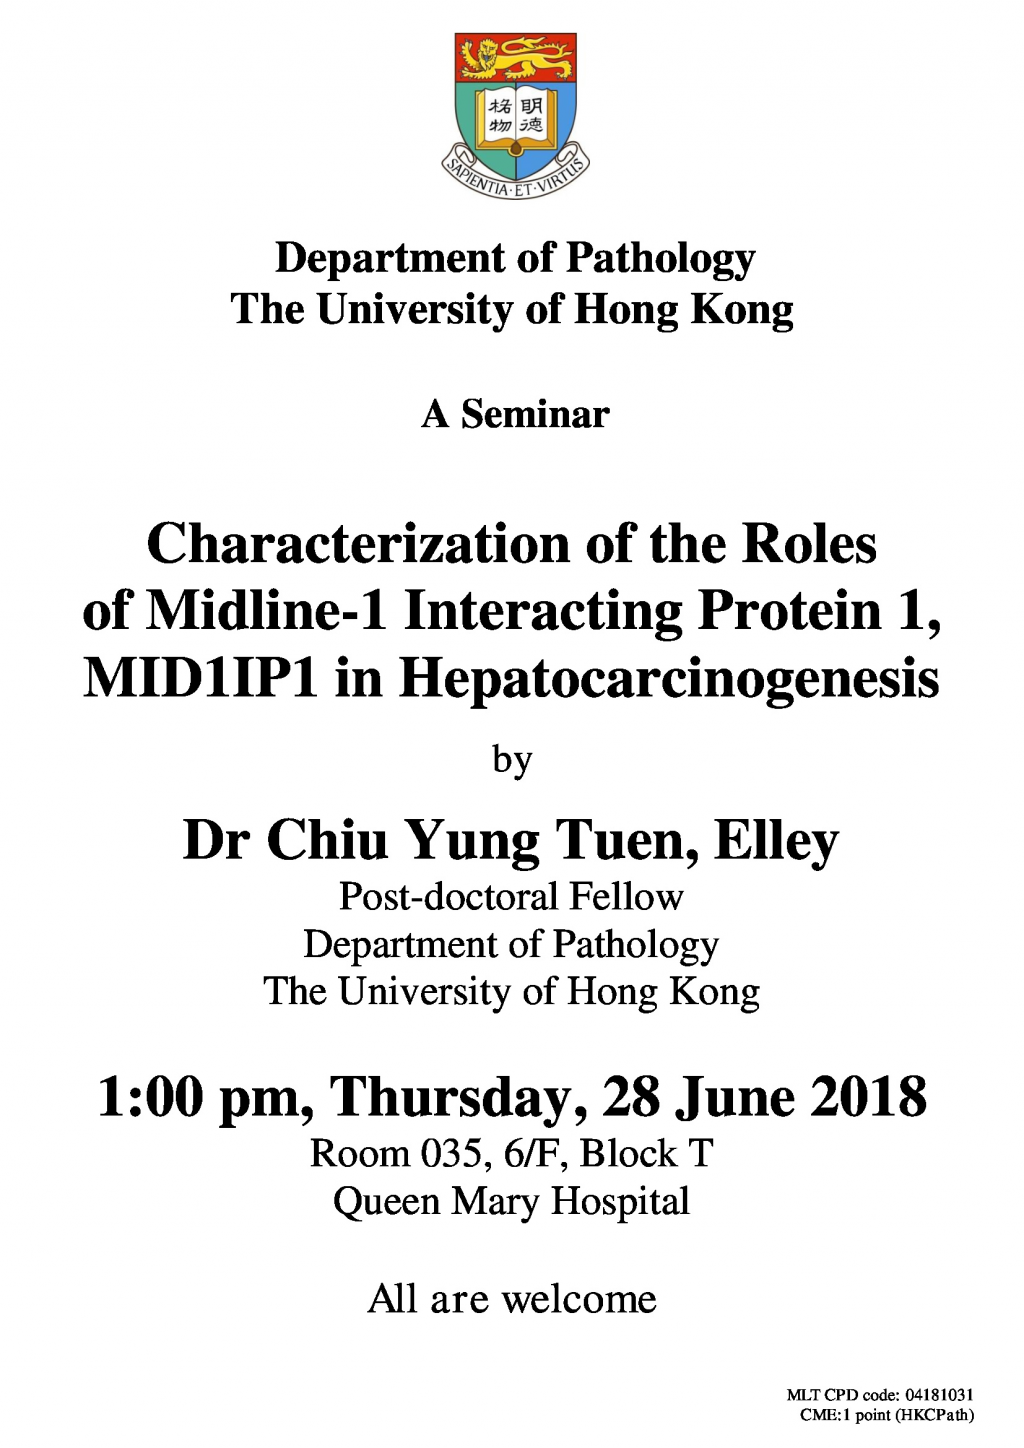 A Seminar on Characterization of the Roles of Midline-1 Interacting Protein 1, MID1IP1 in Hepatoc